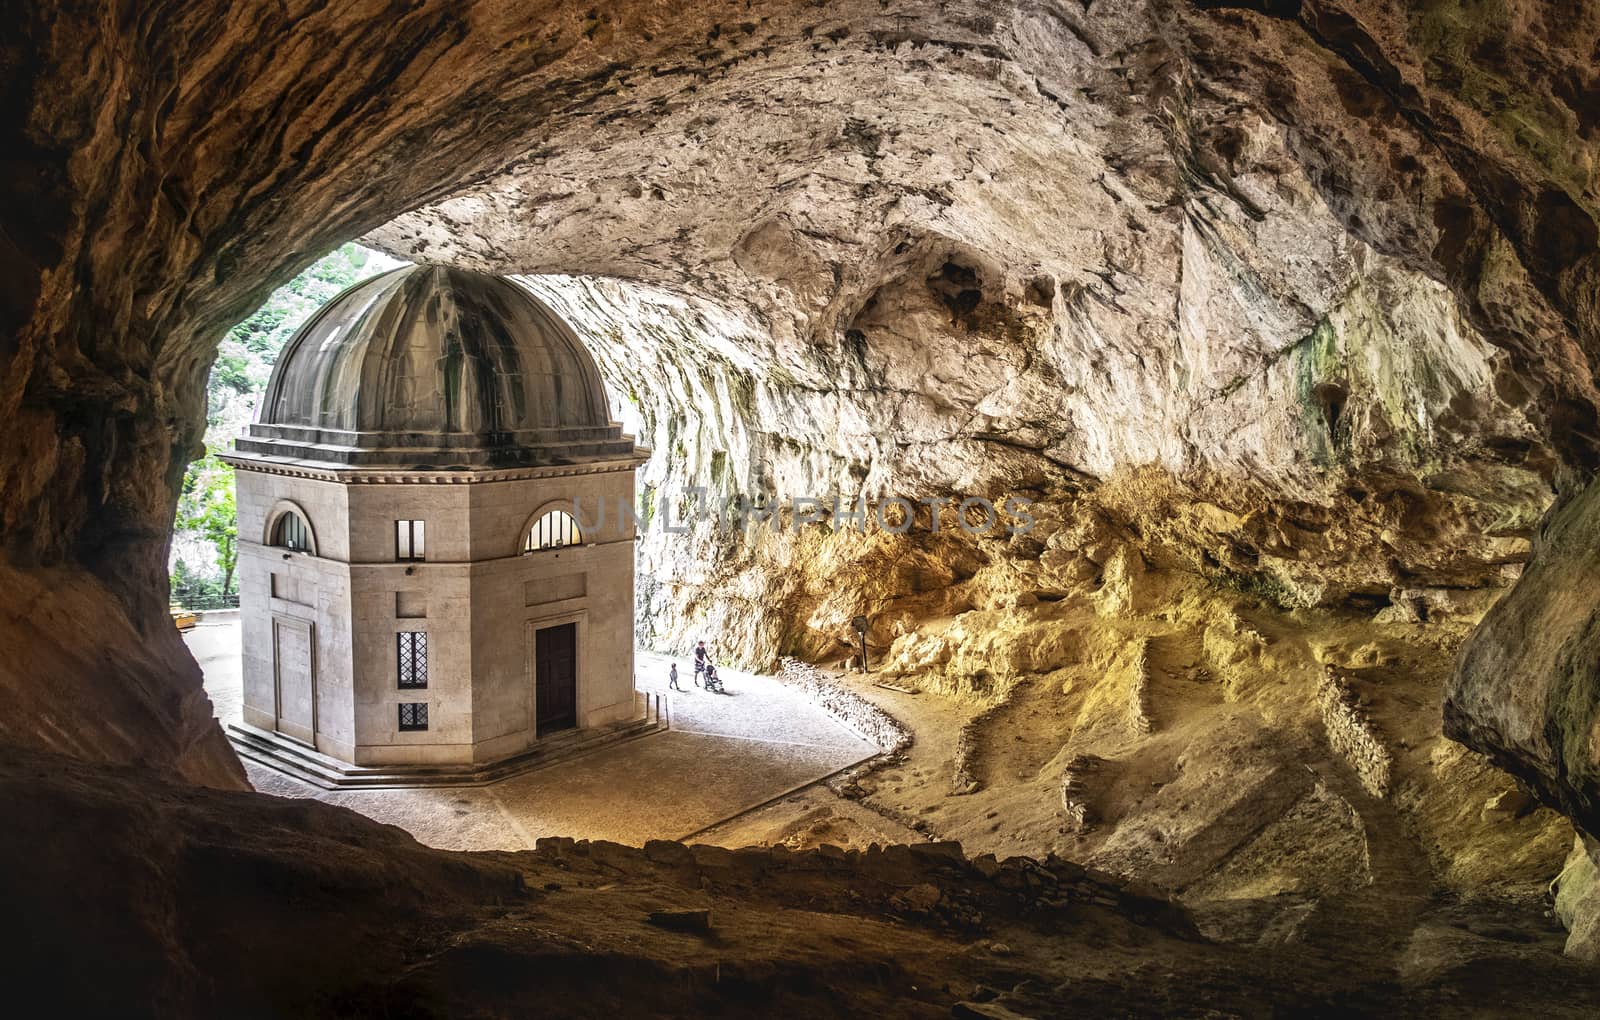 church inside cave in Italy - Marche - the temple of Valadier church near Frasassi caves in Genga Ancona .